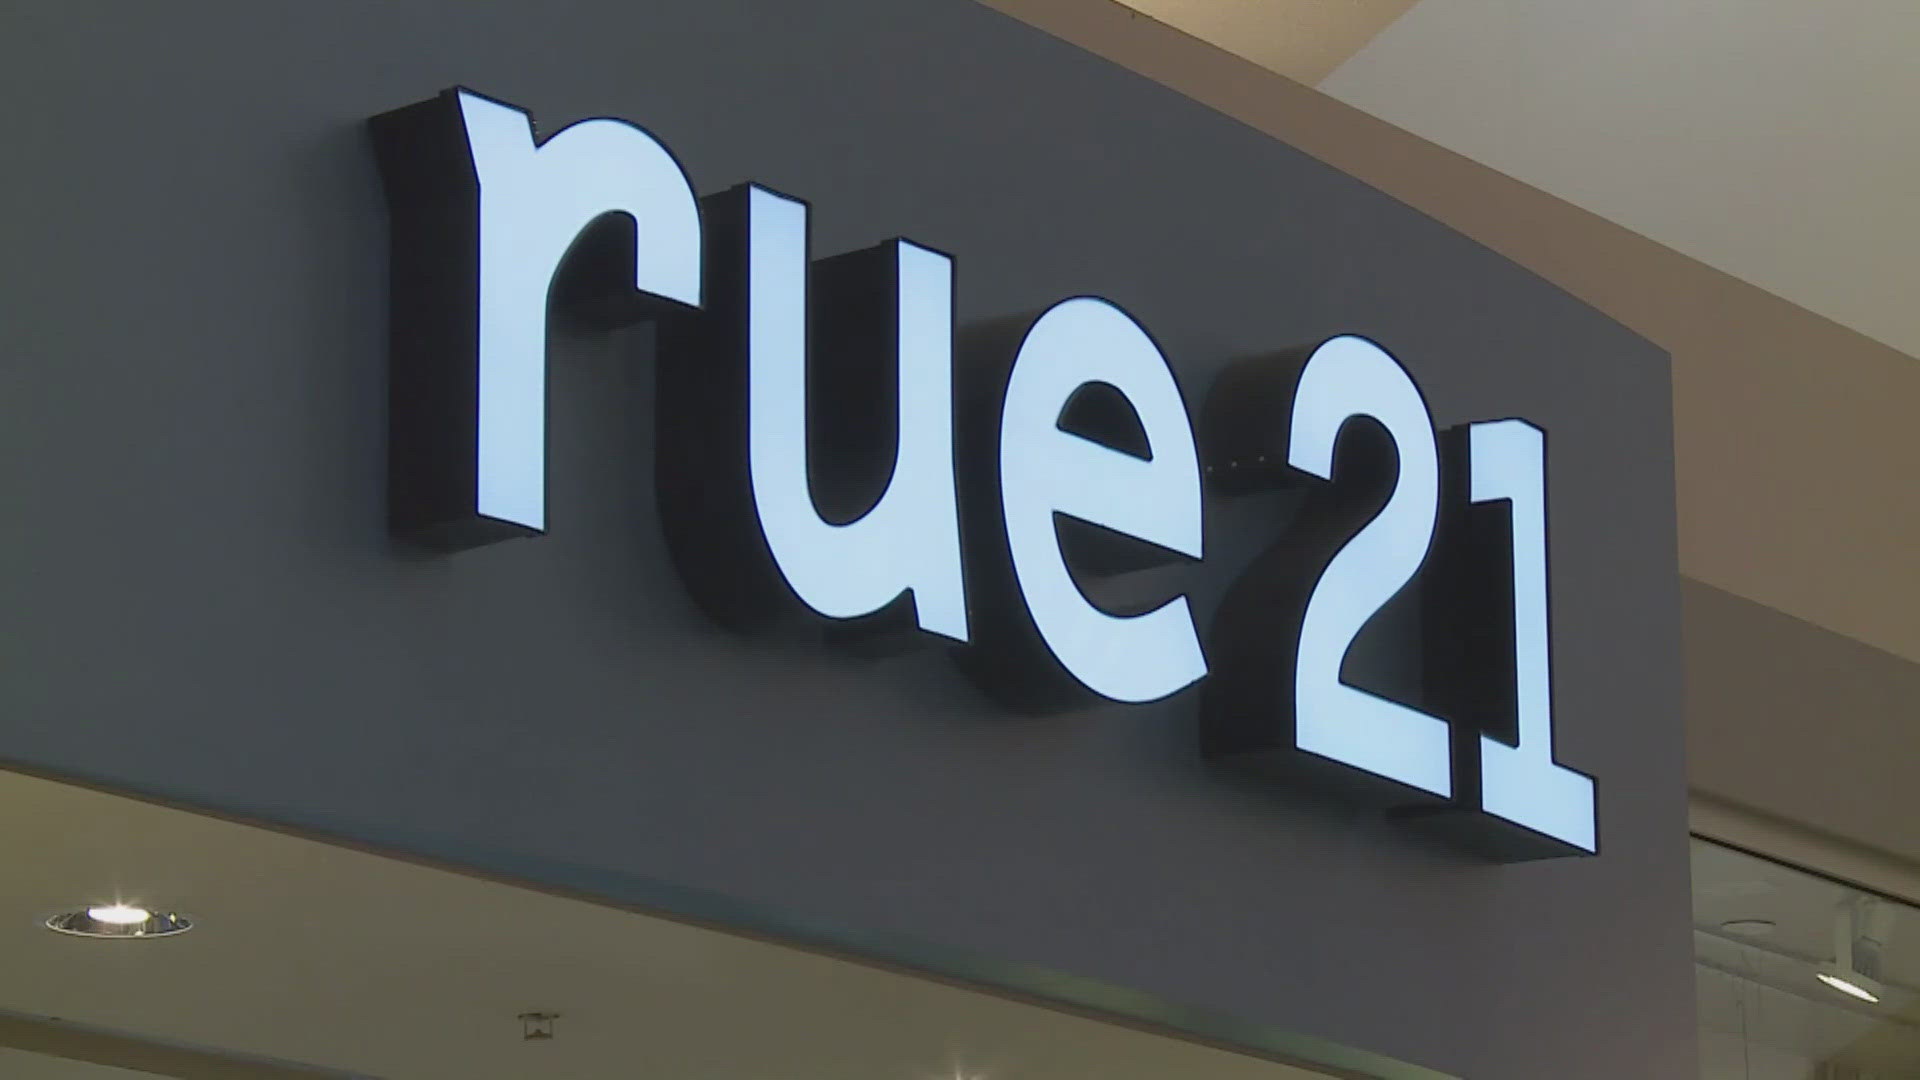 The teen-focused retailer has several stores located in DFW.